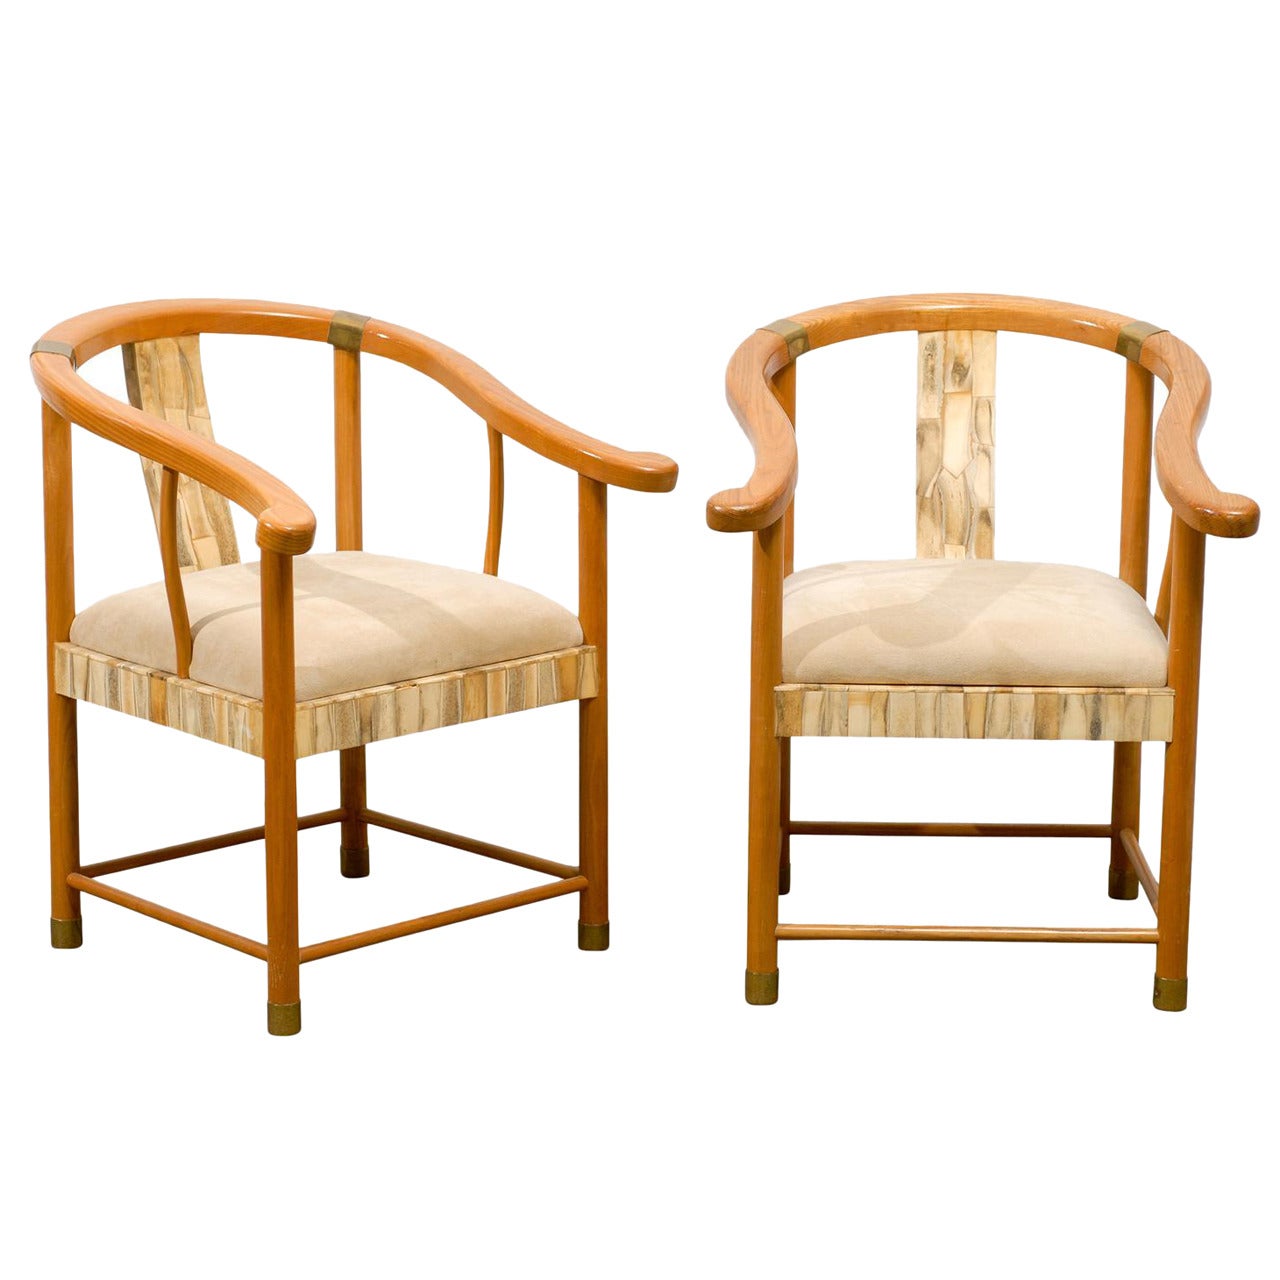 Pair of Asian Inspired Midcentury Chairs with Bone and Brass Detail For Sale